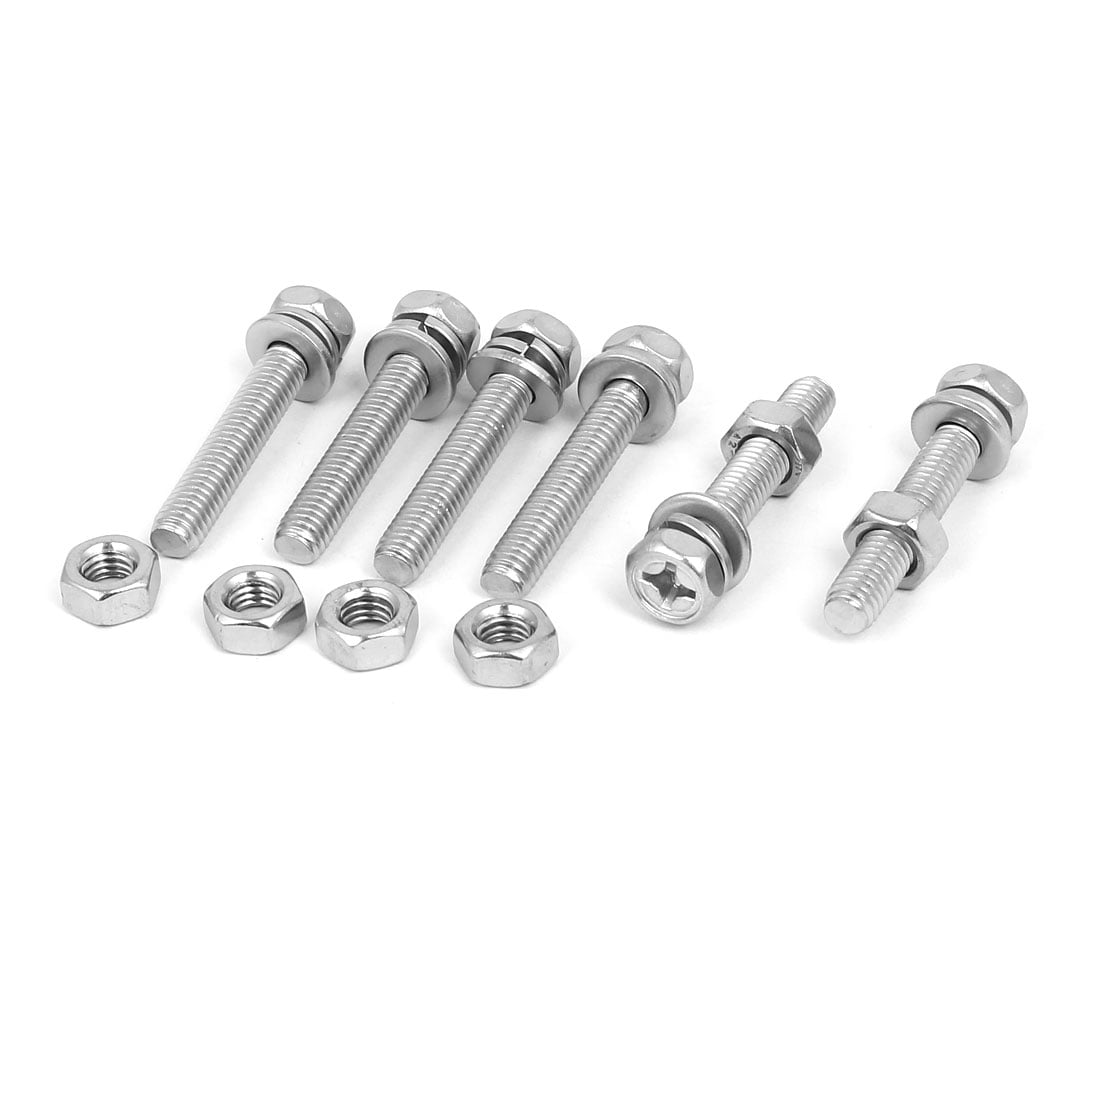 50 3/8”-16 Stainless Steel Bolts 2” Long with Flat/Lock Washers & Nuts 